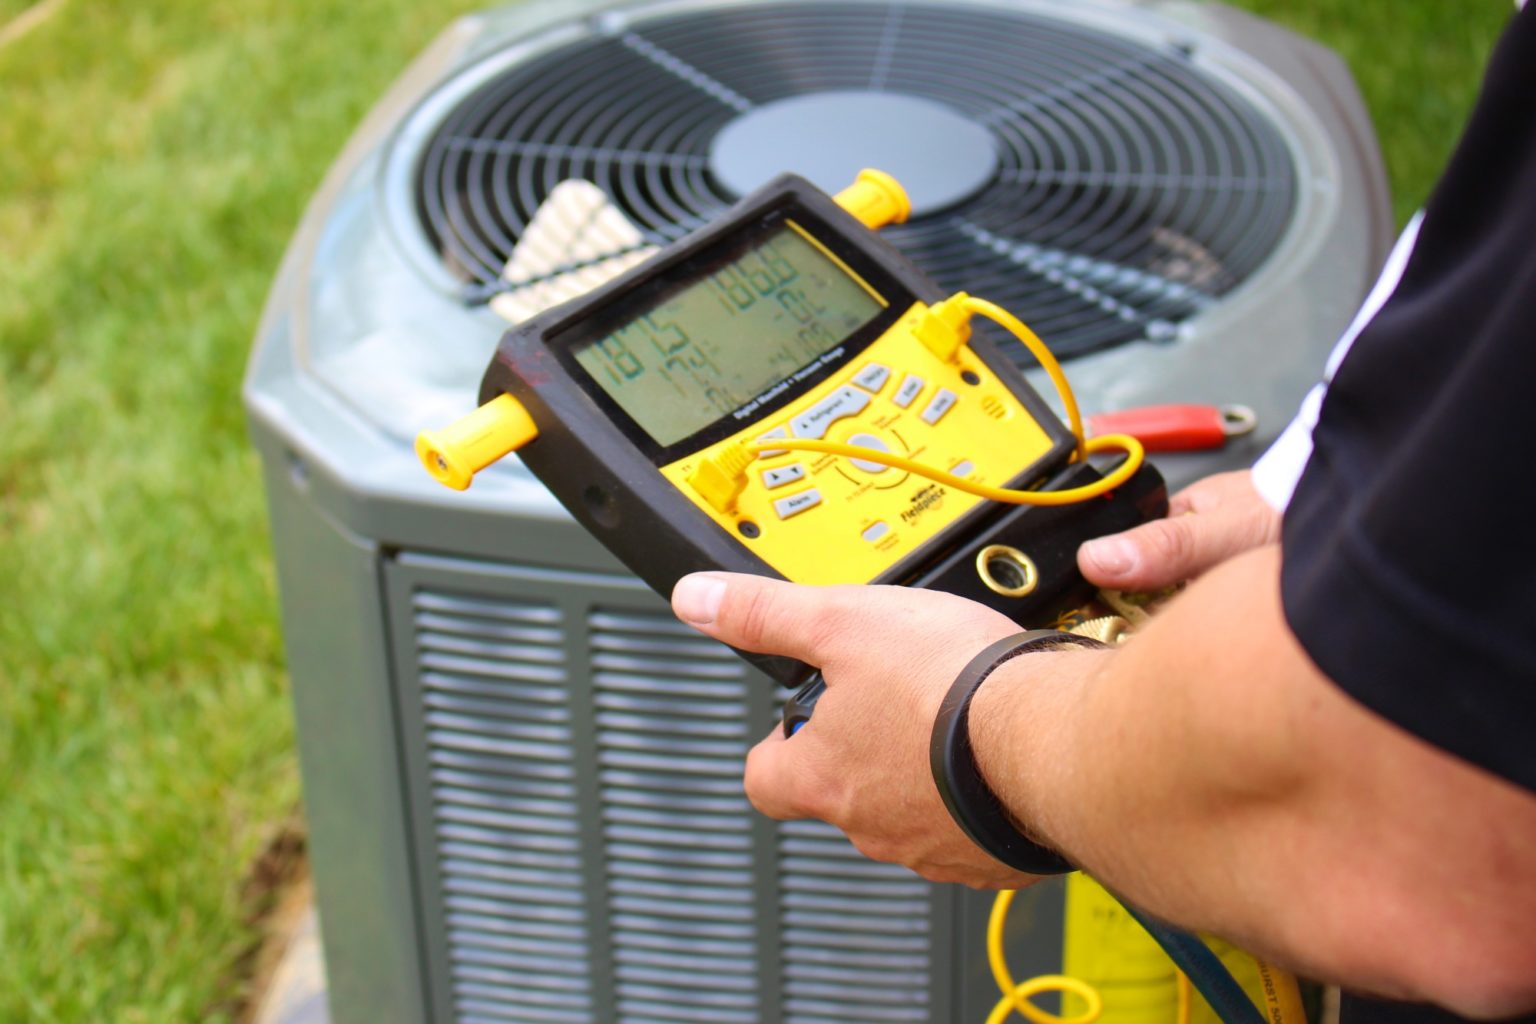 Heating & Cooling Services in Cypress, TX